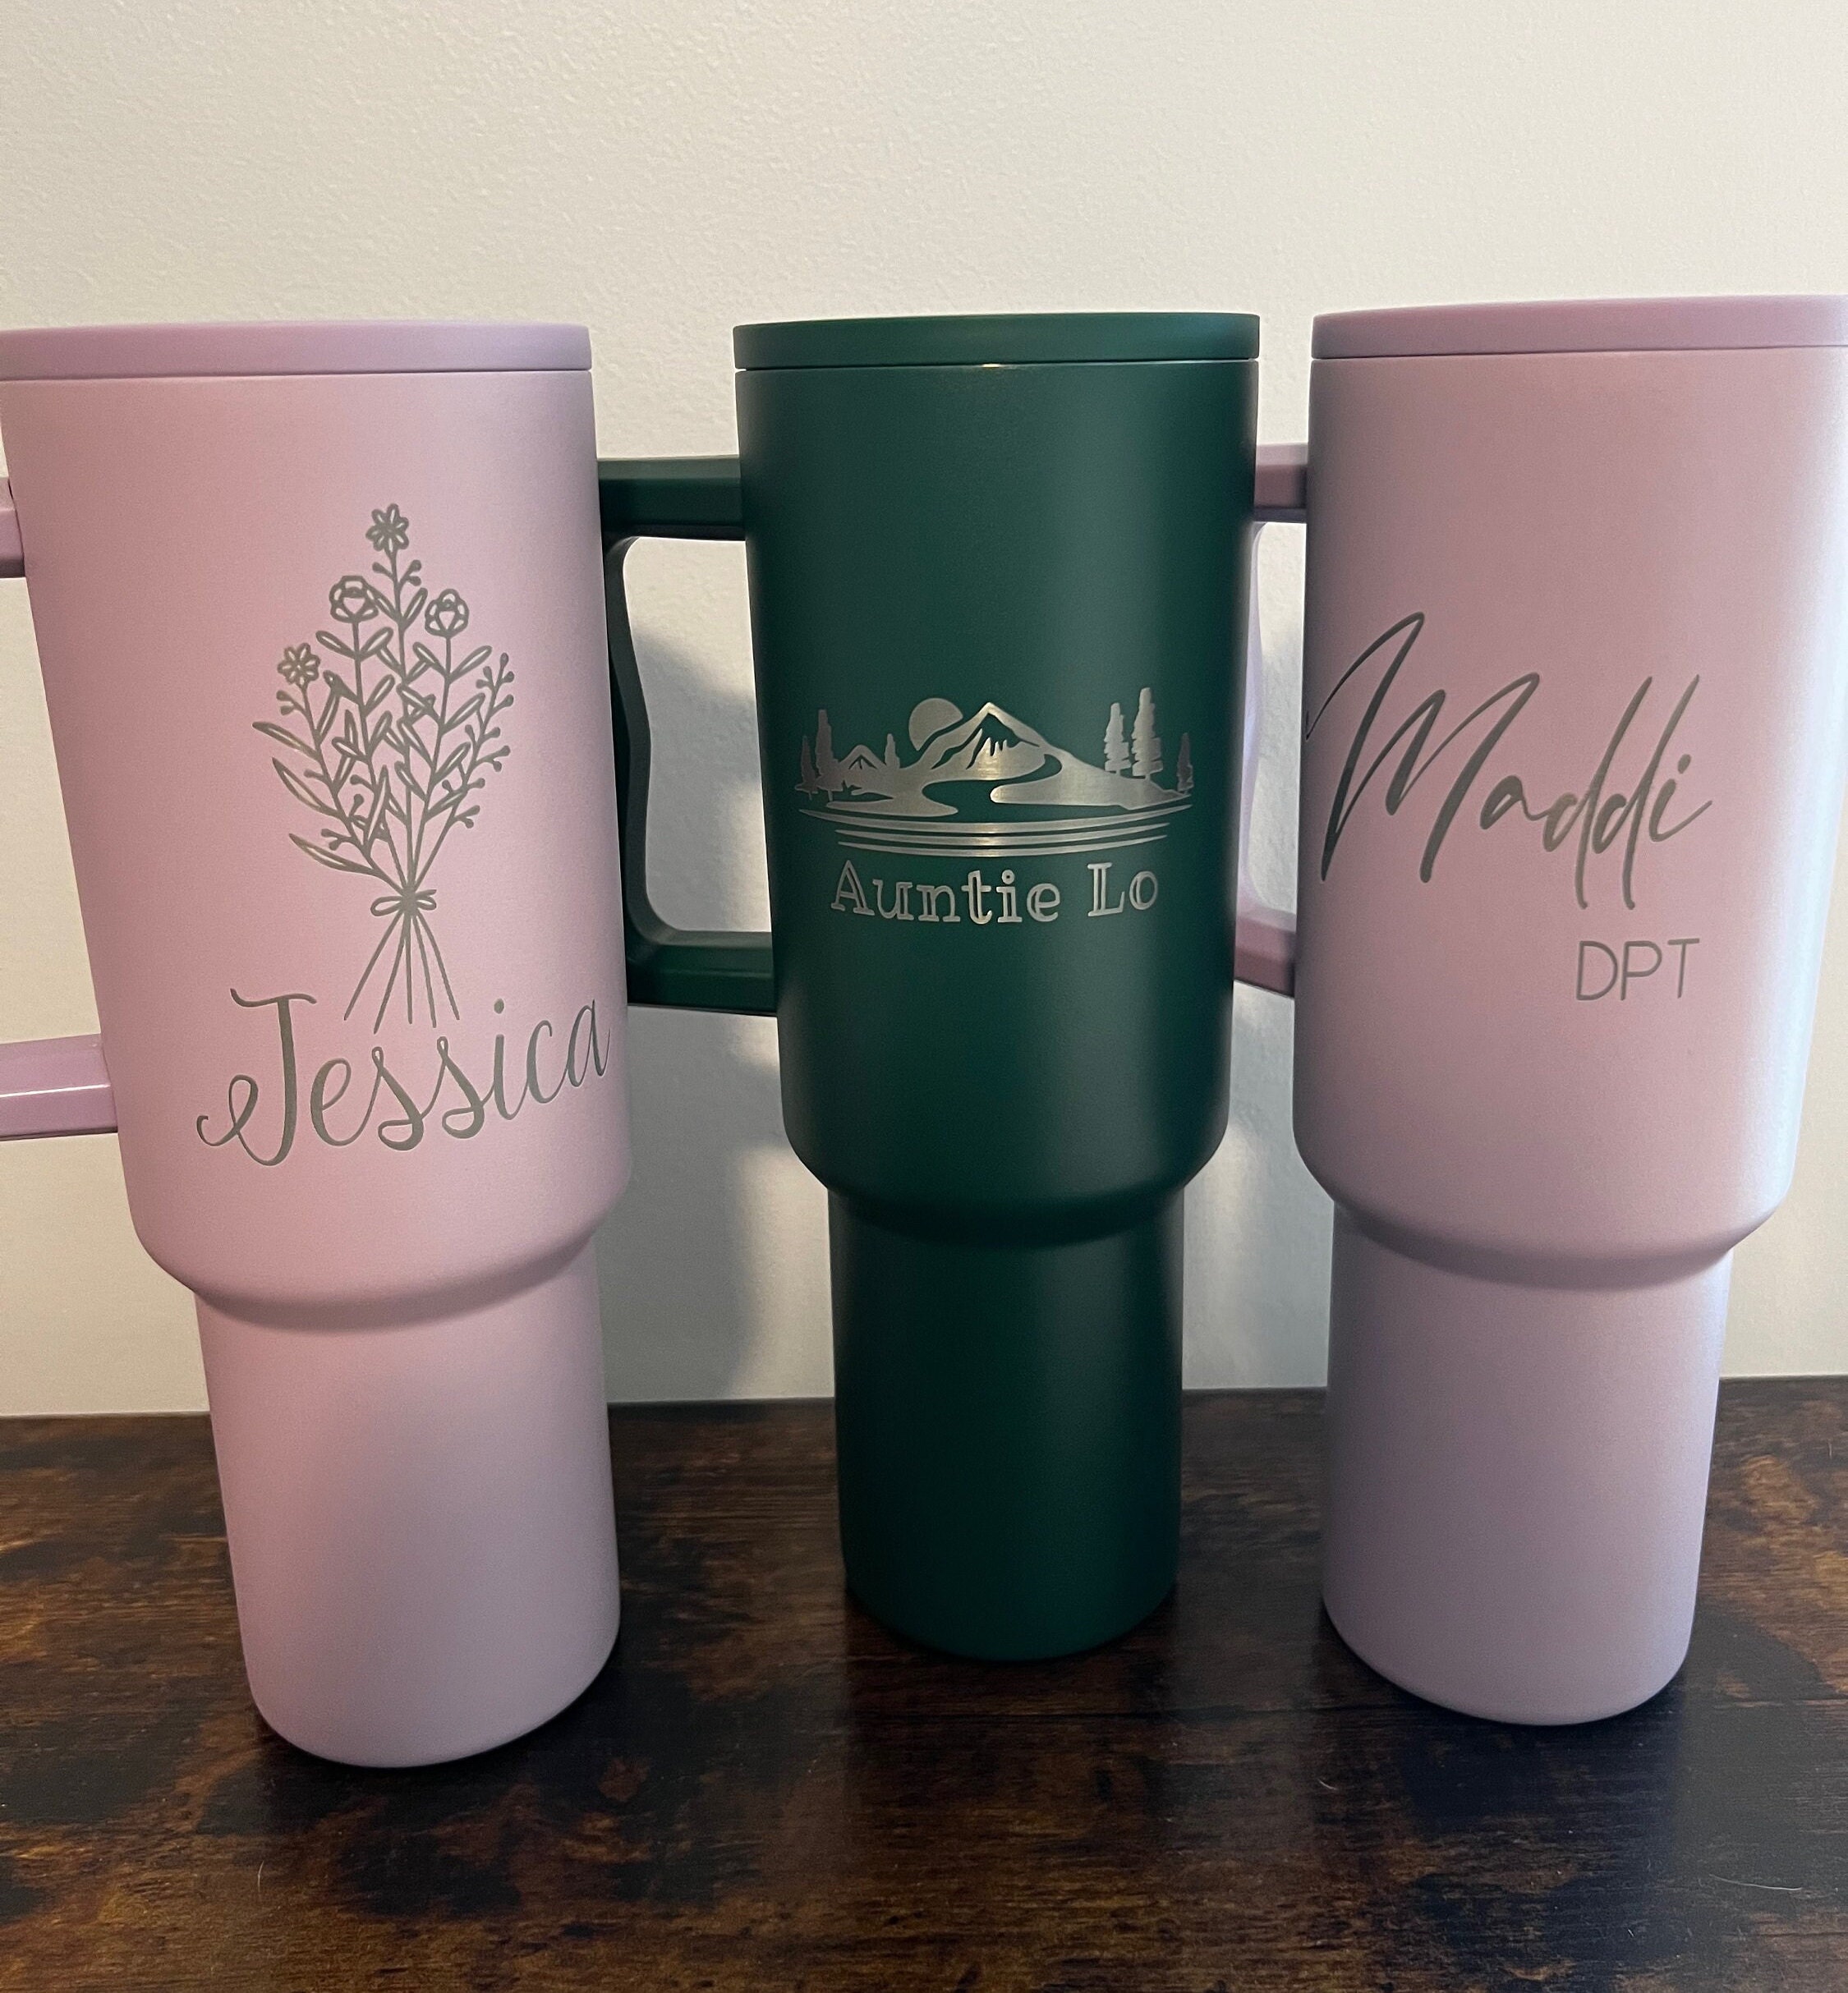 Simple Modern 40 oz Tumbler with Handle and Straw Lid Color “Mauve Me”